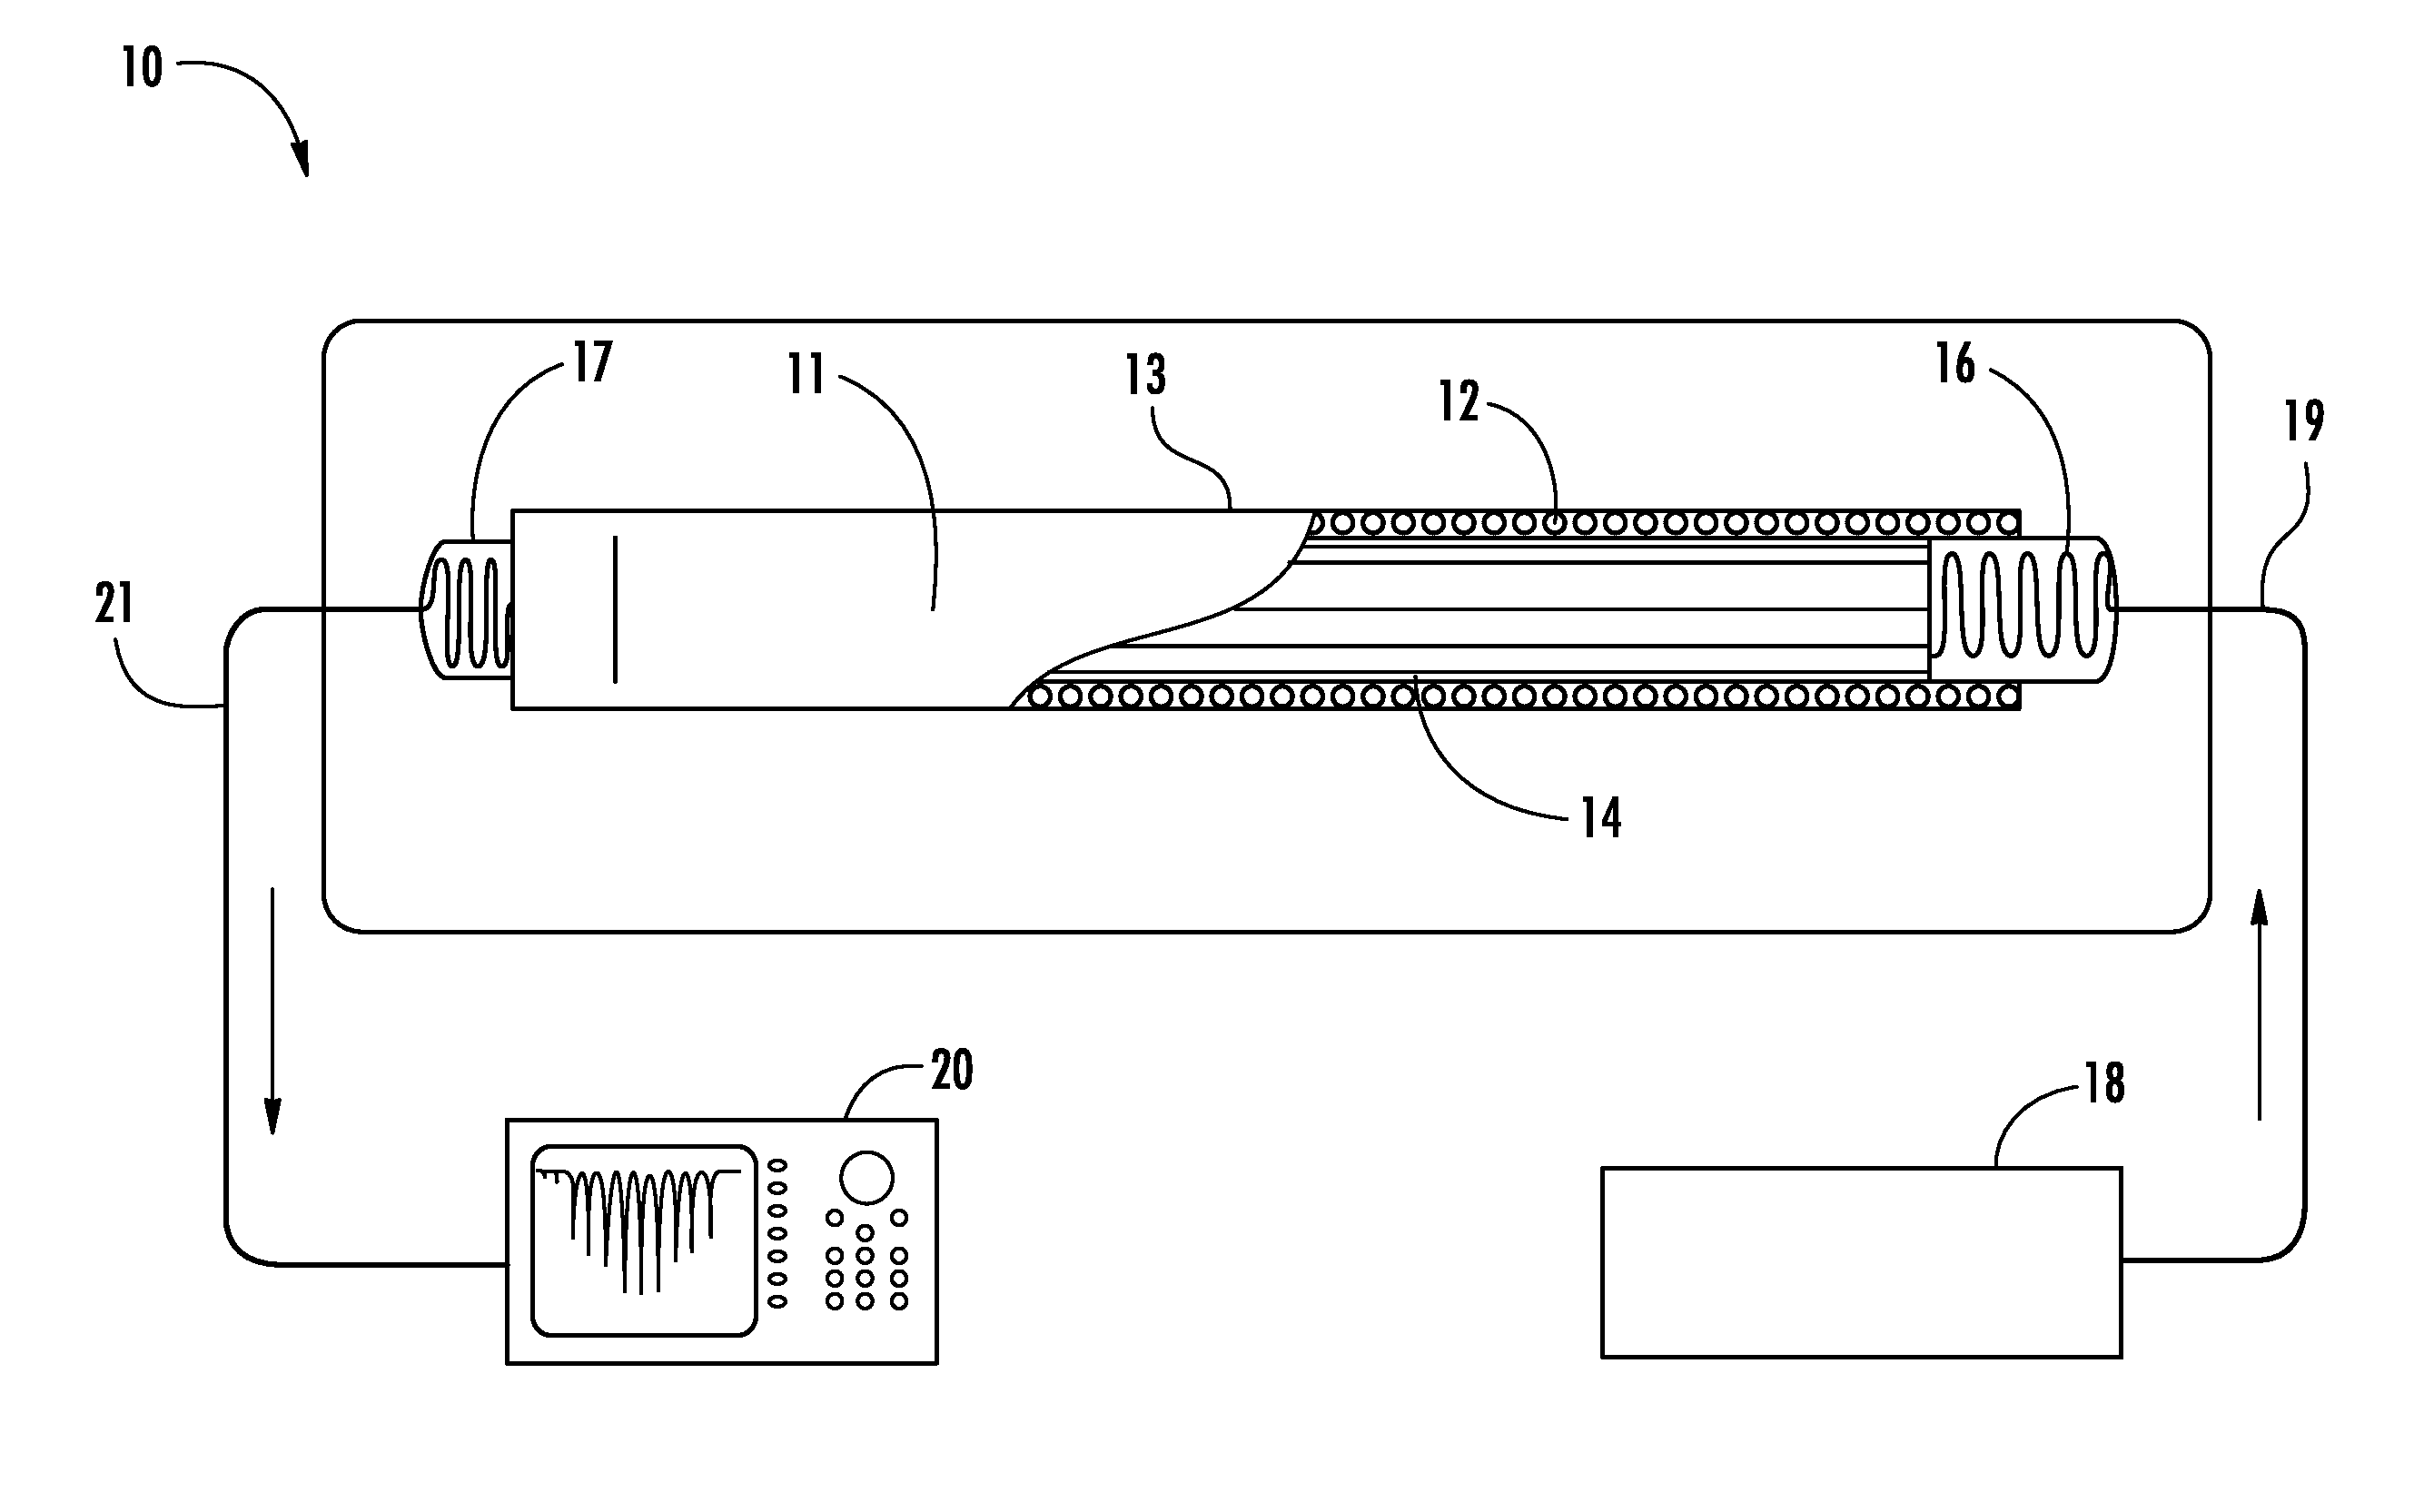 Apparatus and method for on-line, real-time analysis of chemical gases dissolved in transformer oil